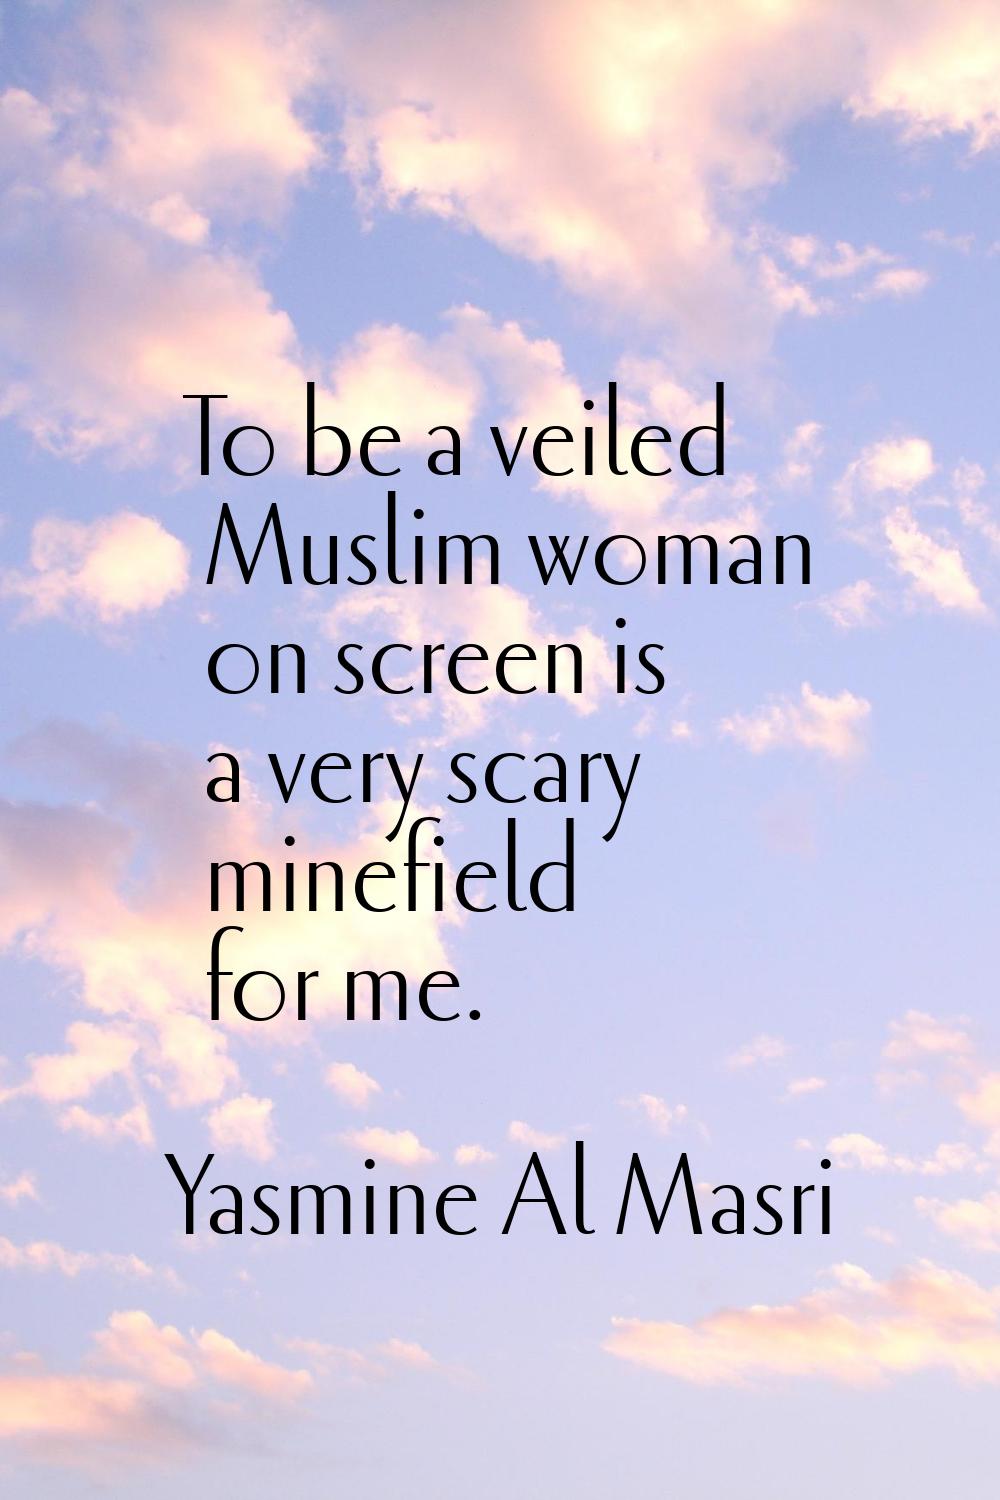 To be a veiled Muslim woman on screen is a very scary minefield for me.